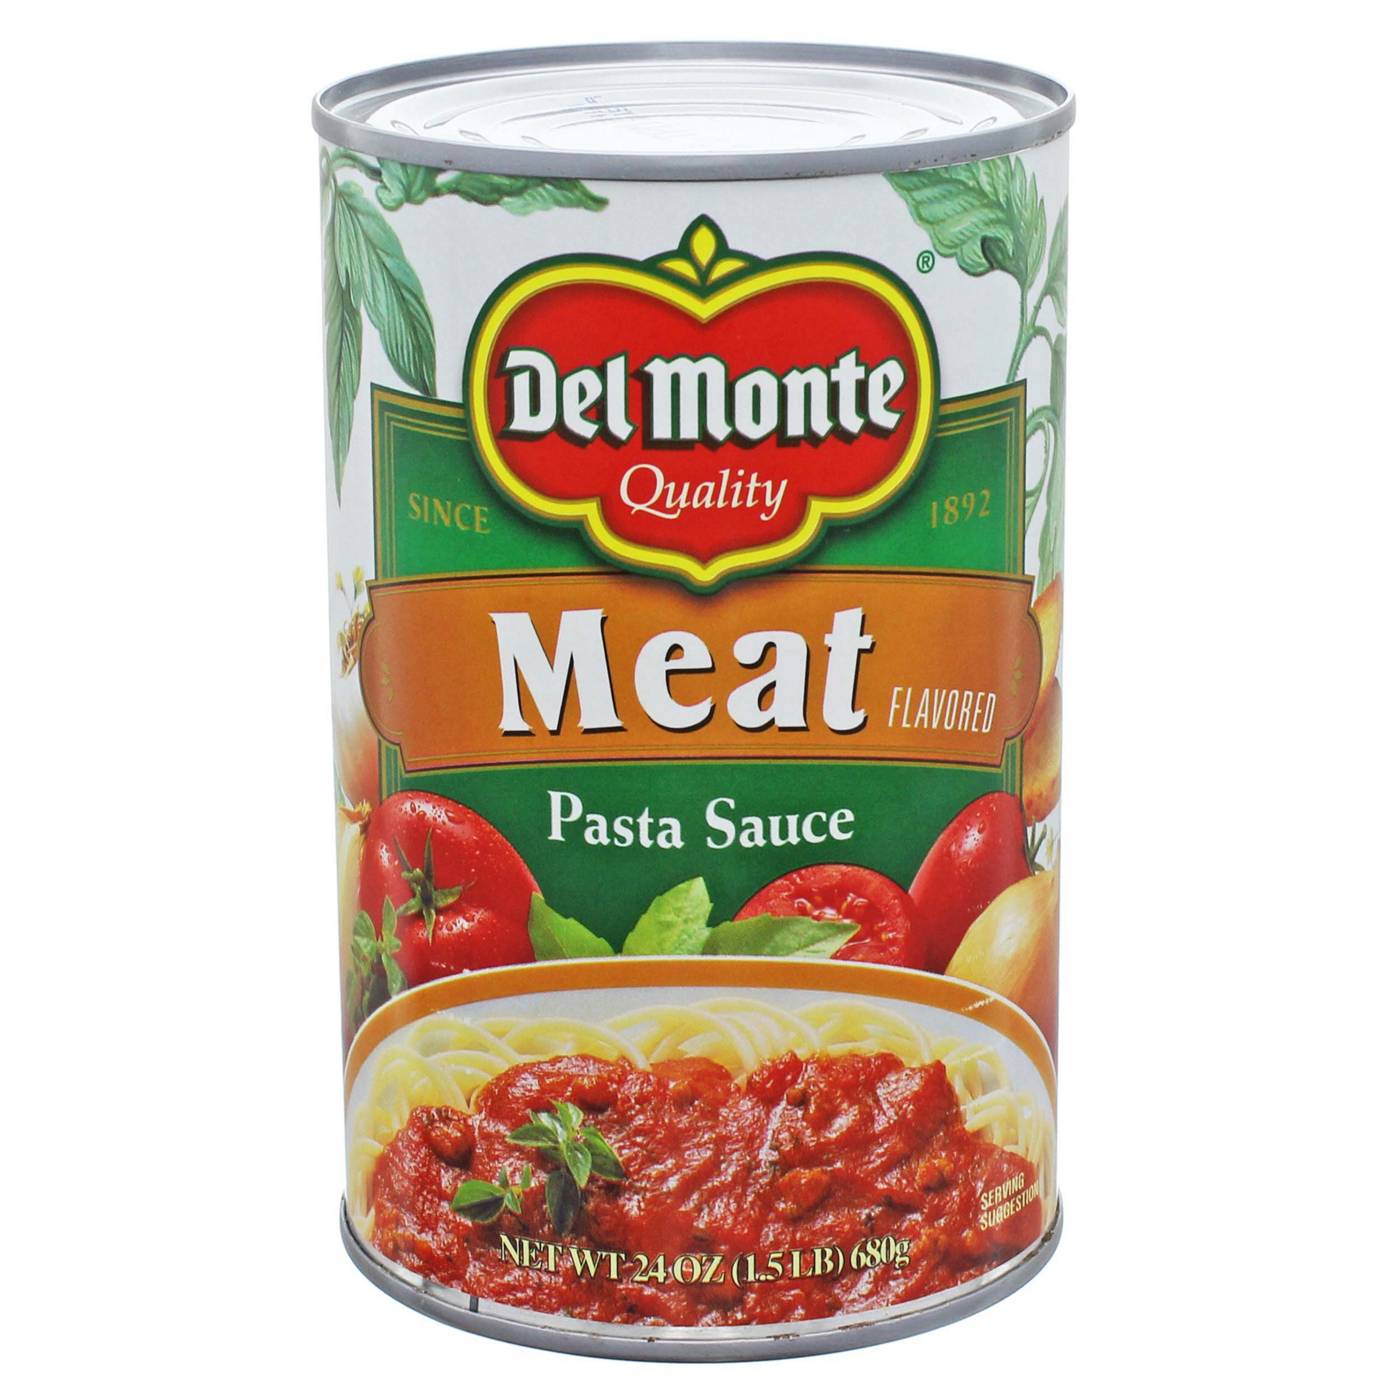 Del Monte Meat Flavored Pasta Sauce; image 1 of 2